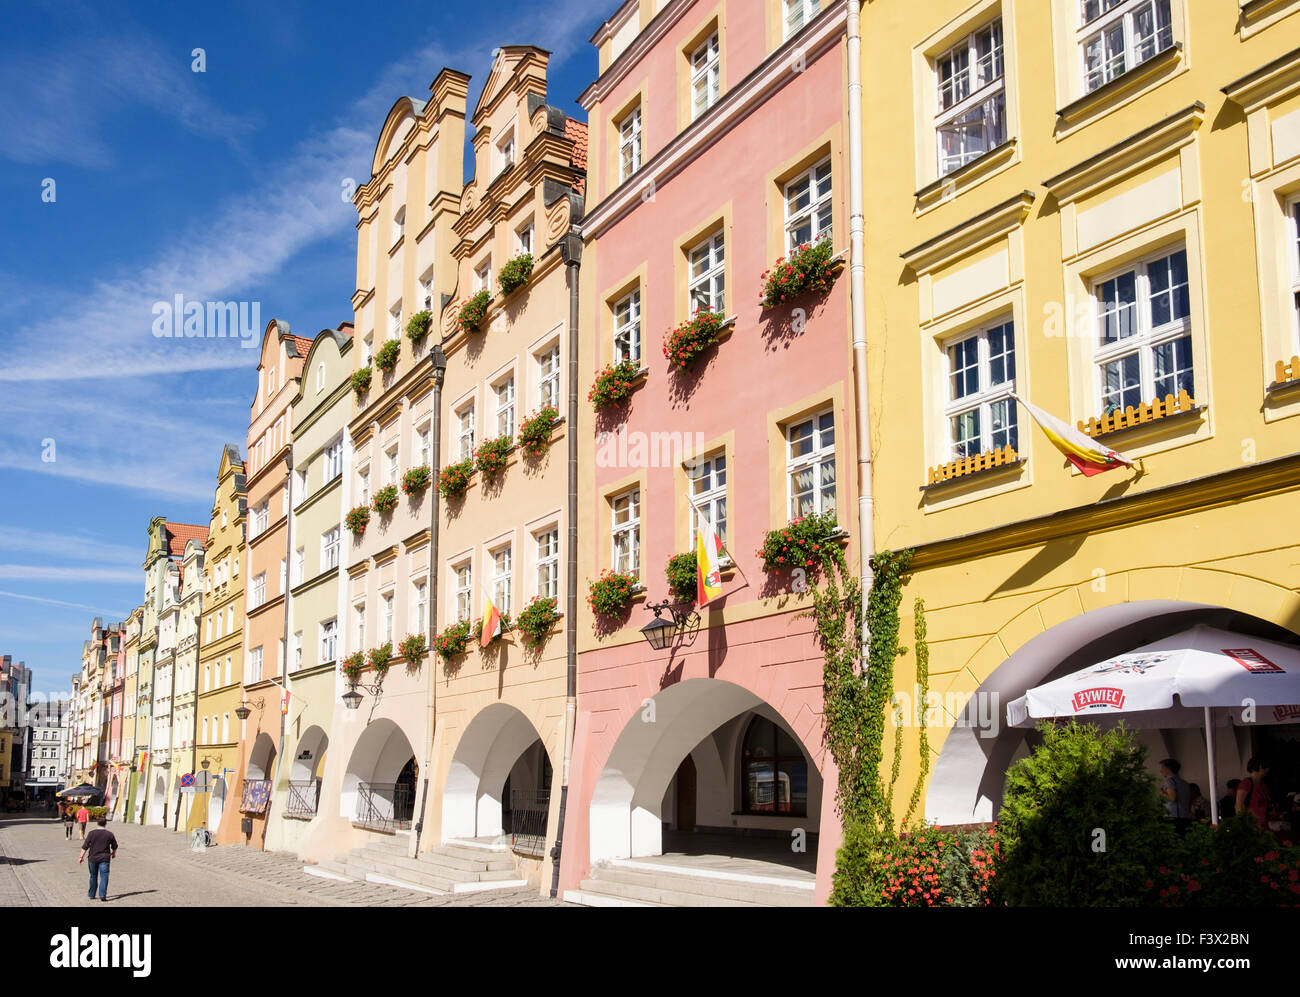 Colourful Baroque tenement houses and arcades overlooking cobbled Plac Ratuszowy or Town Hall Square Jelenia Gora Poland Stock Photo